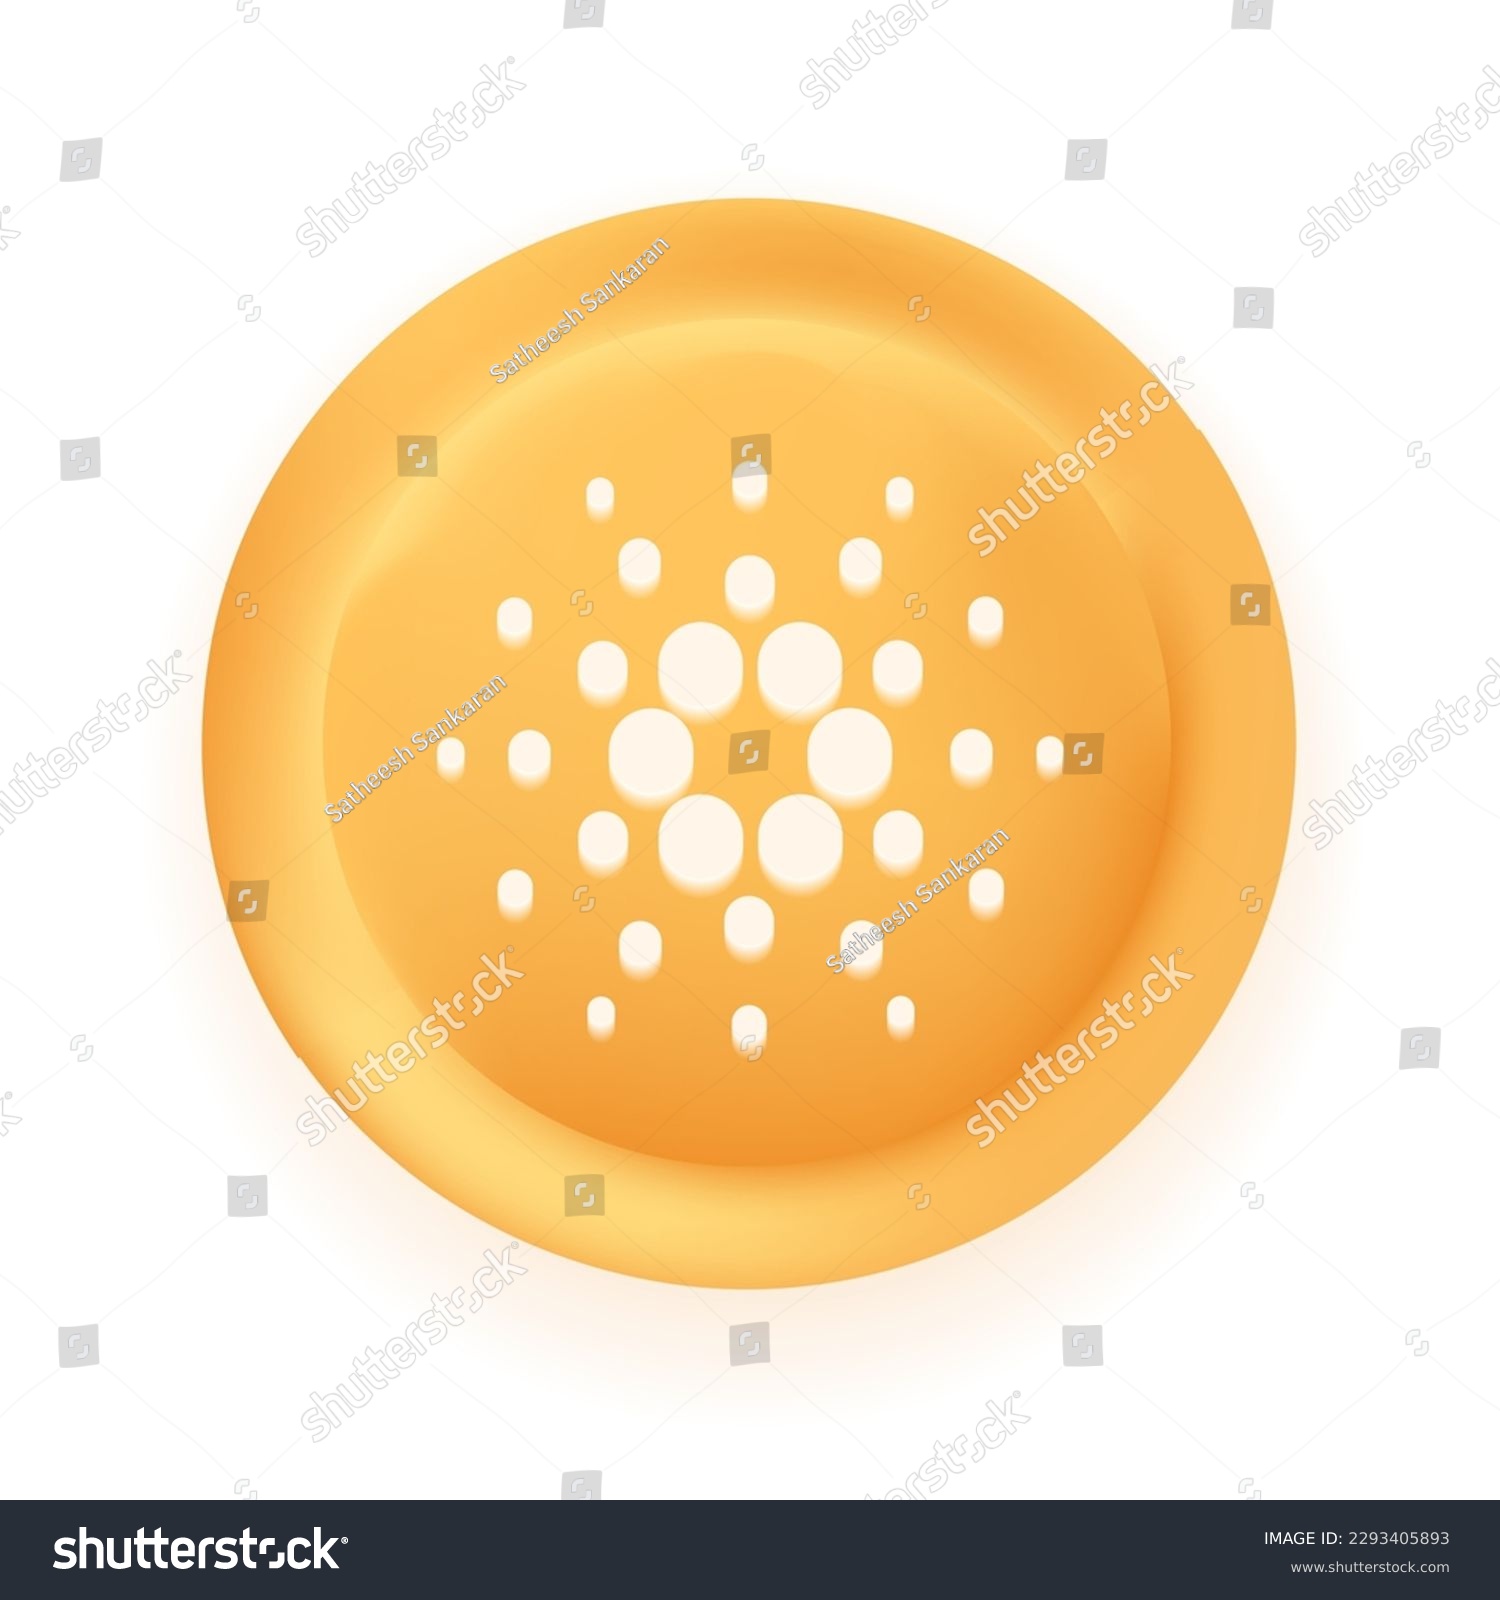 SVG of Cardano (ADA) crypto currency 3D coin vector illustration isolated on white background. Can be used as virtual money icon, logo, emblem, sticker and badge designs. svg